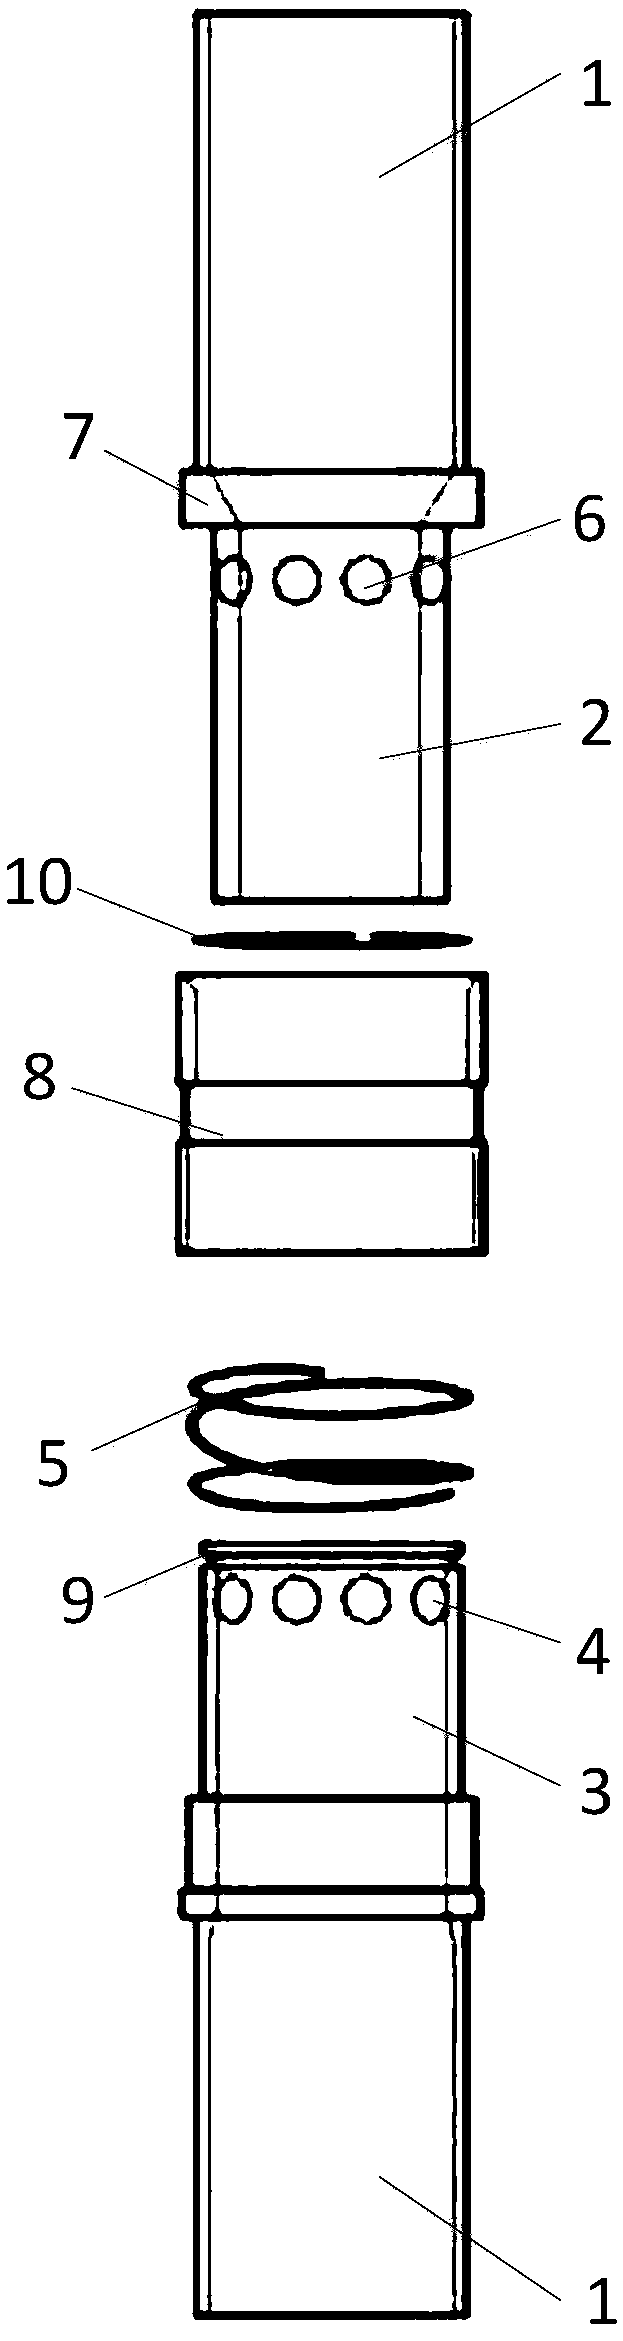 A multifunctional insulated operating lever for quickly replacing an operating head